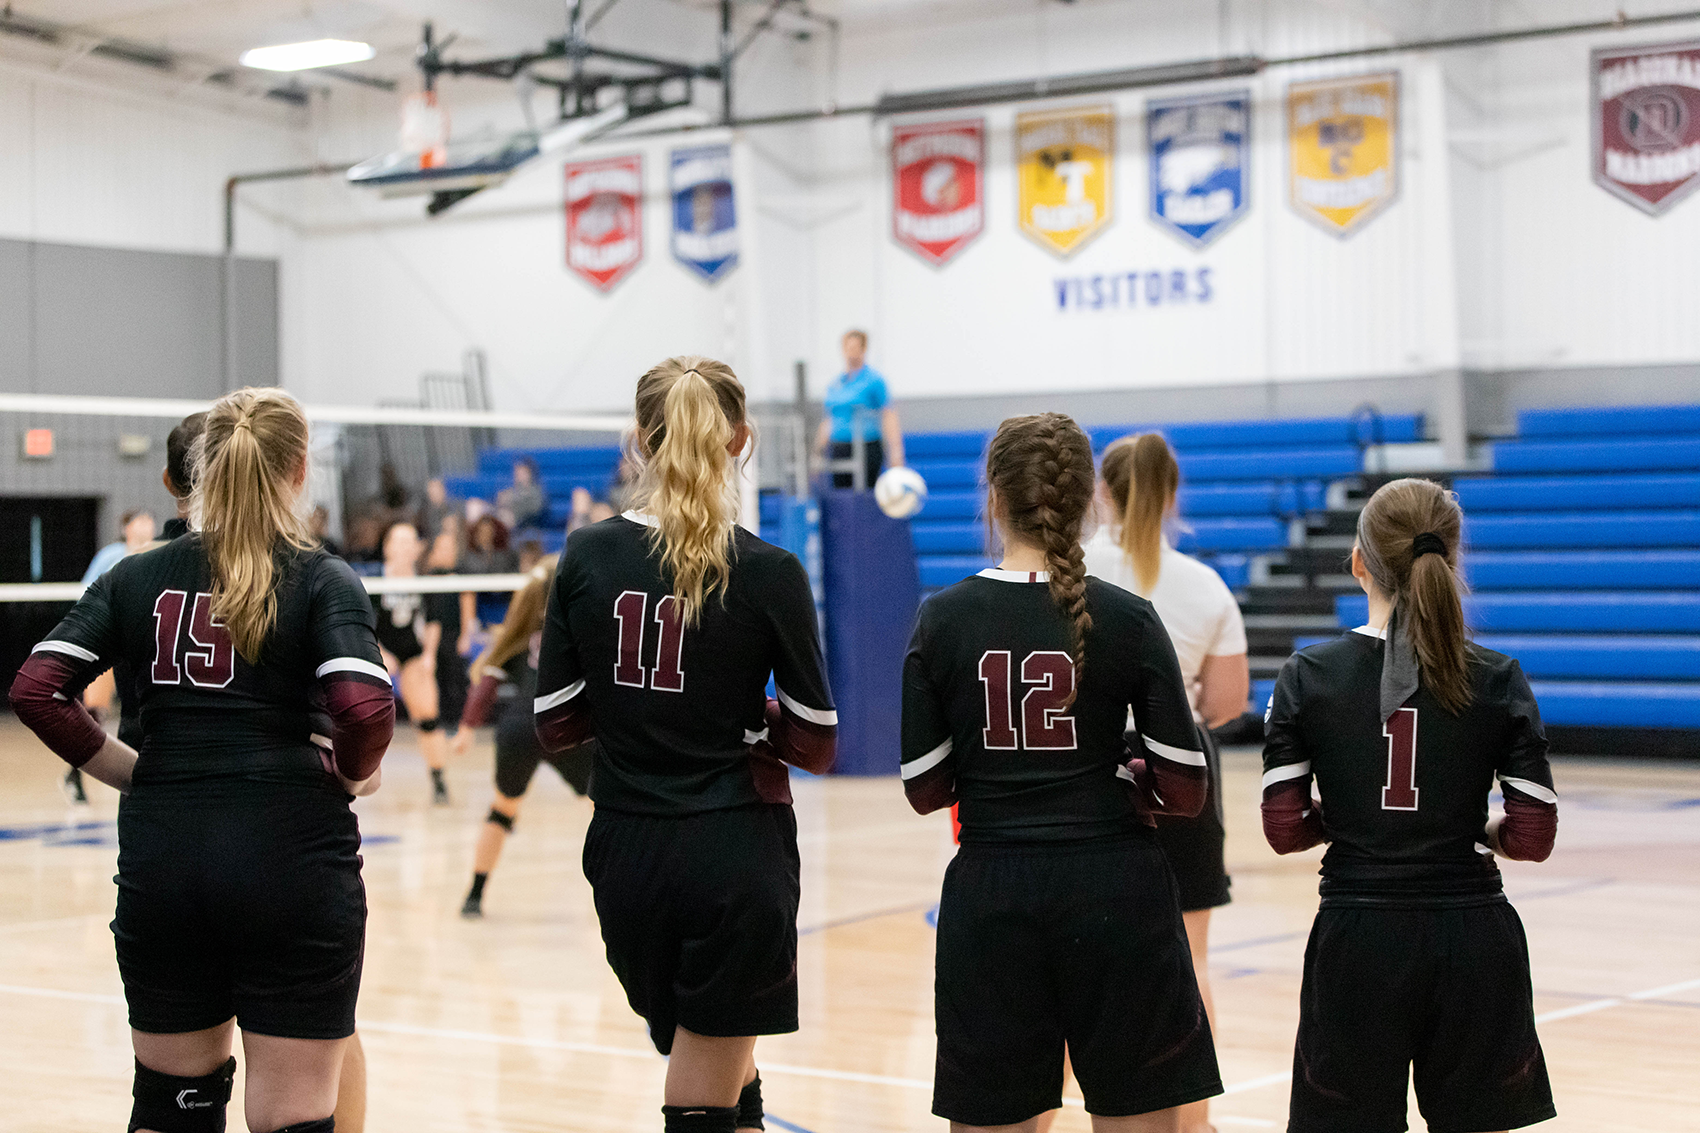 Season of Challenges Continues for Faith Volleyball